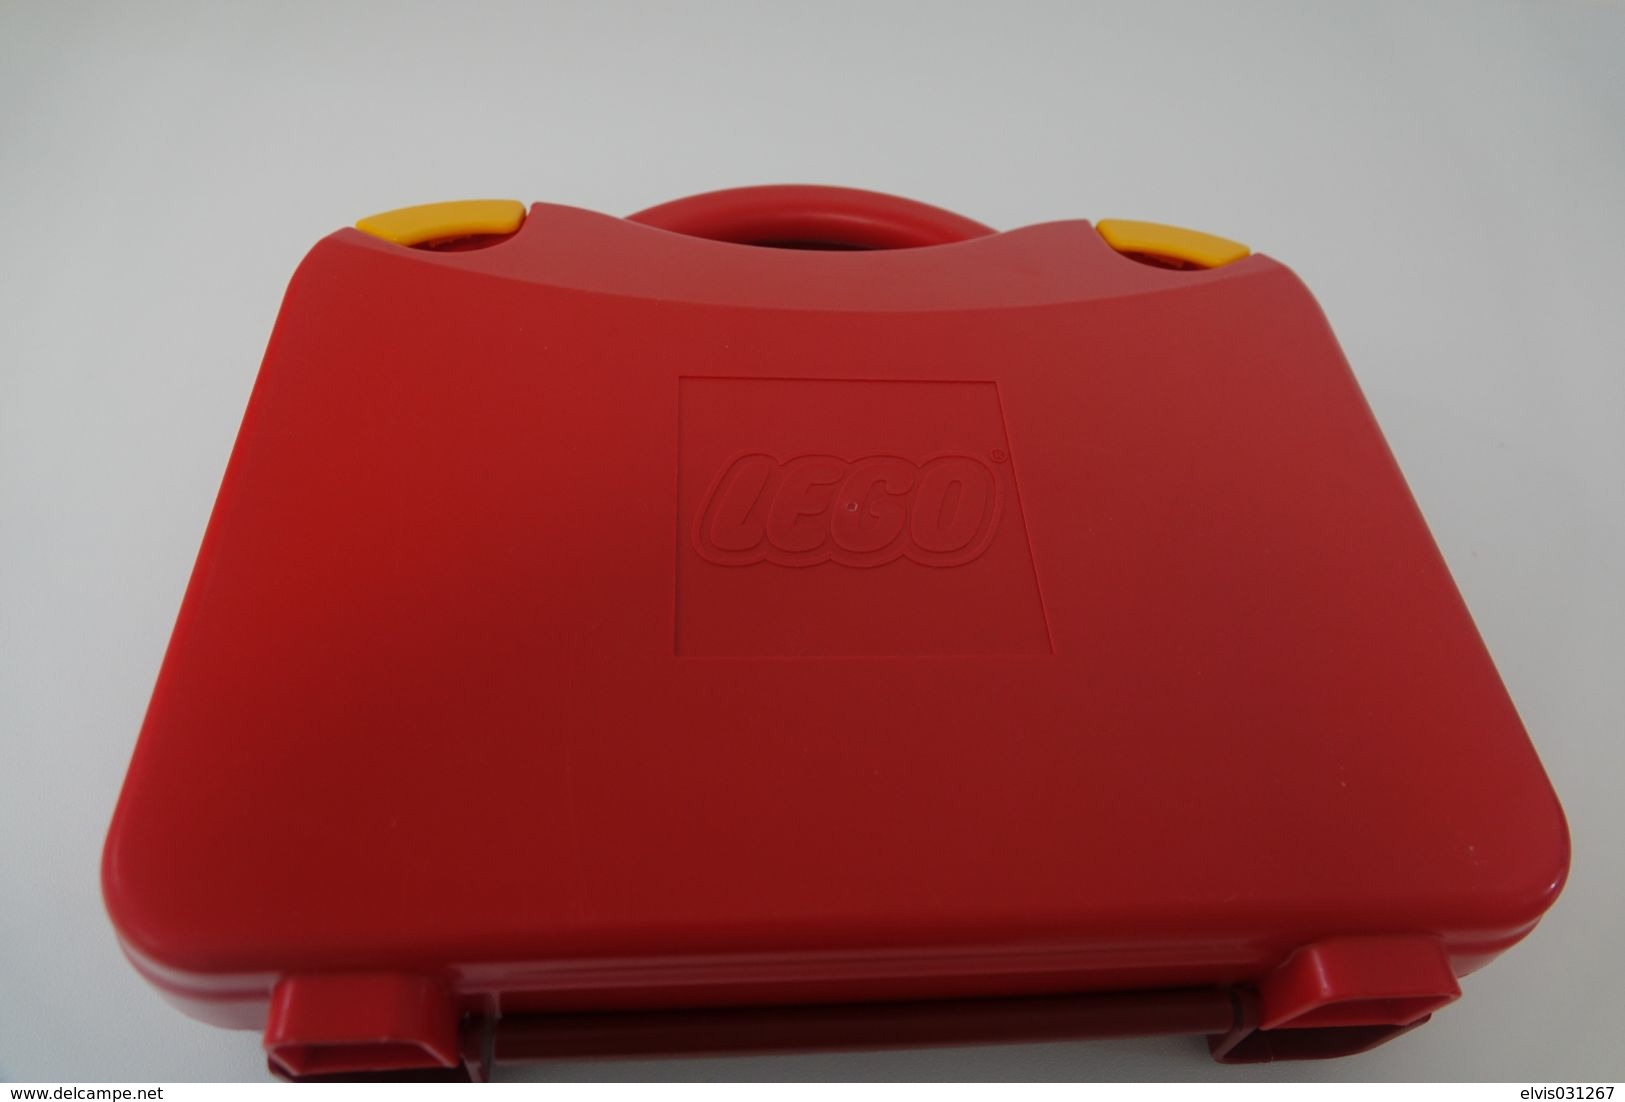 LEGO - 759528c03 - Storage Case With Rounded Corners And Red Lid, Yellow Latches - Original Lego 2015 - Vintage - Kataloge